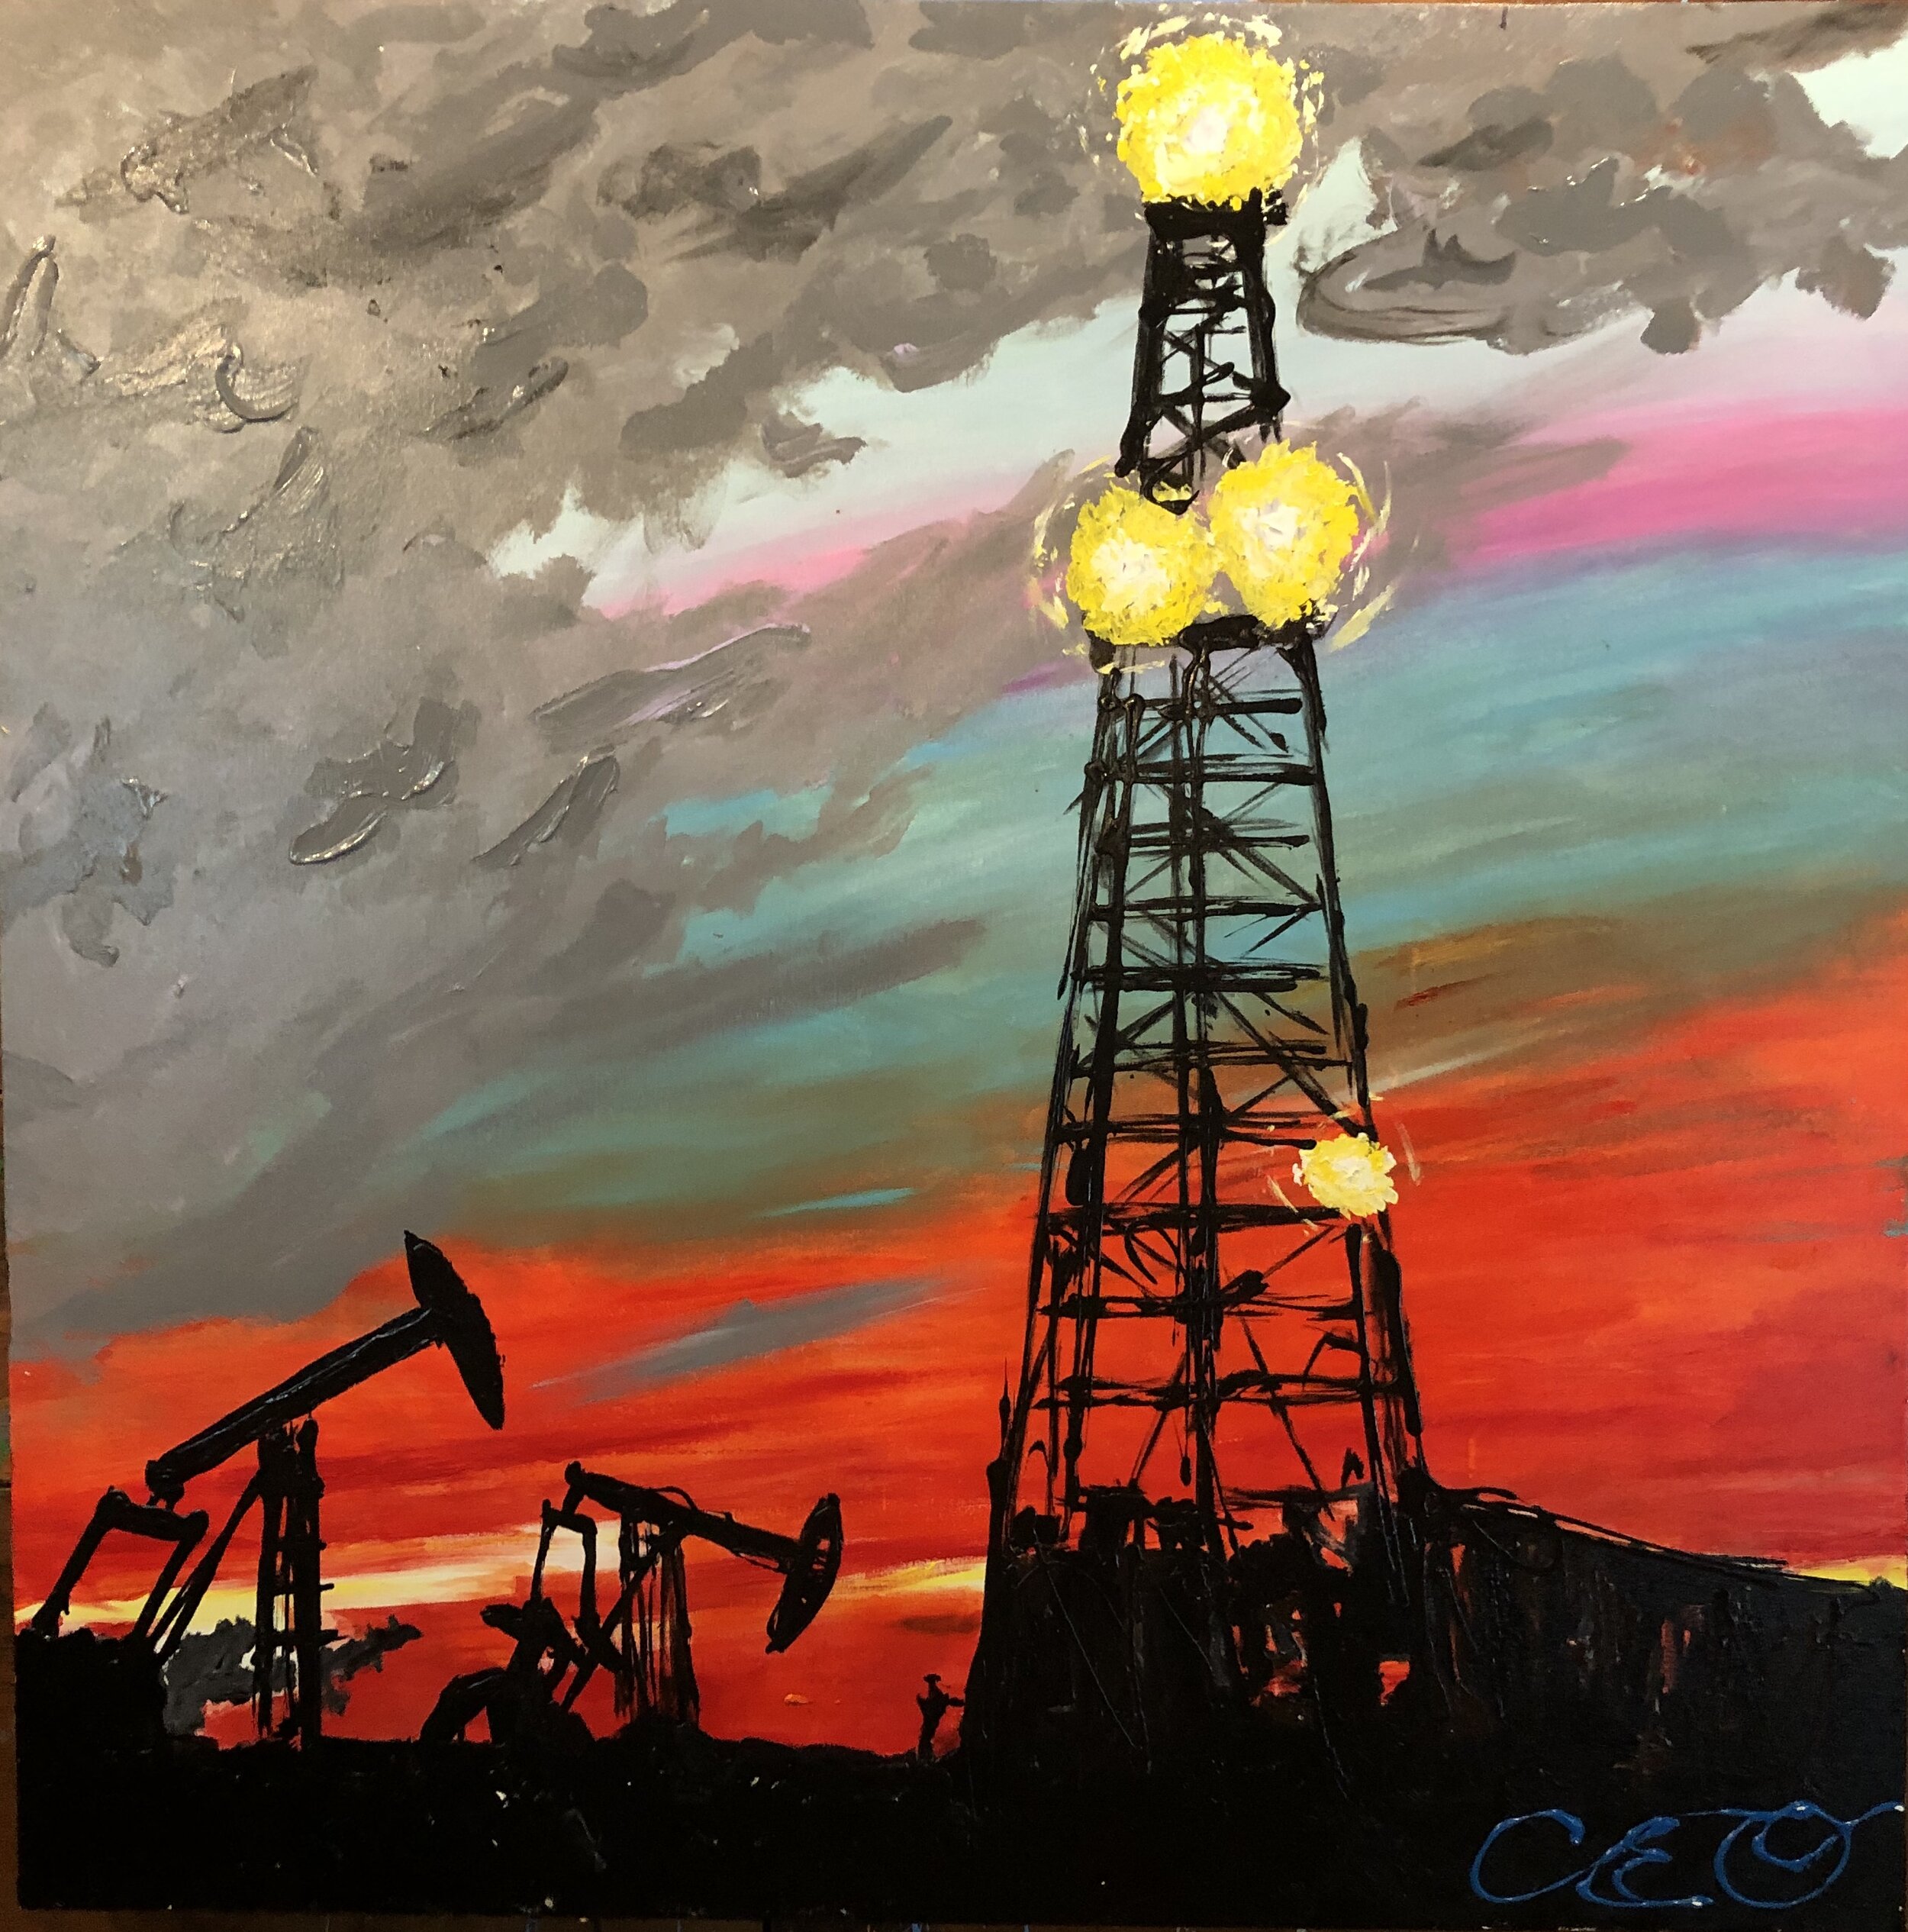 End of the day at the oil field